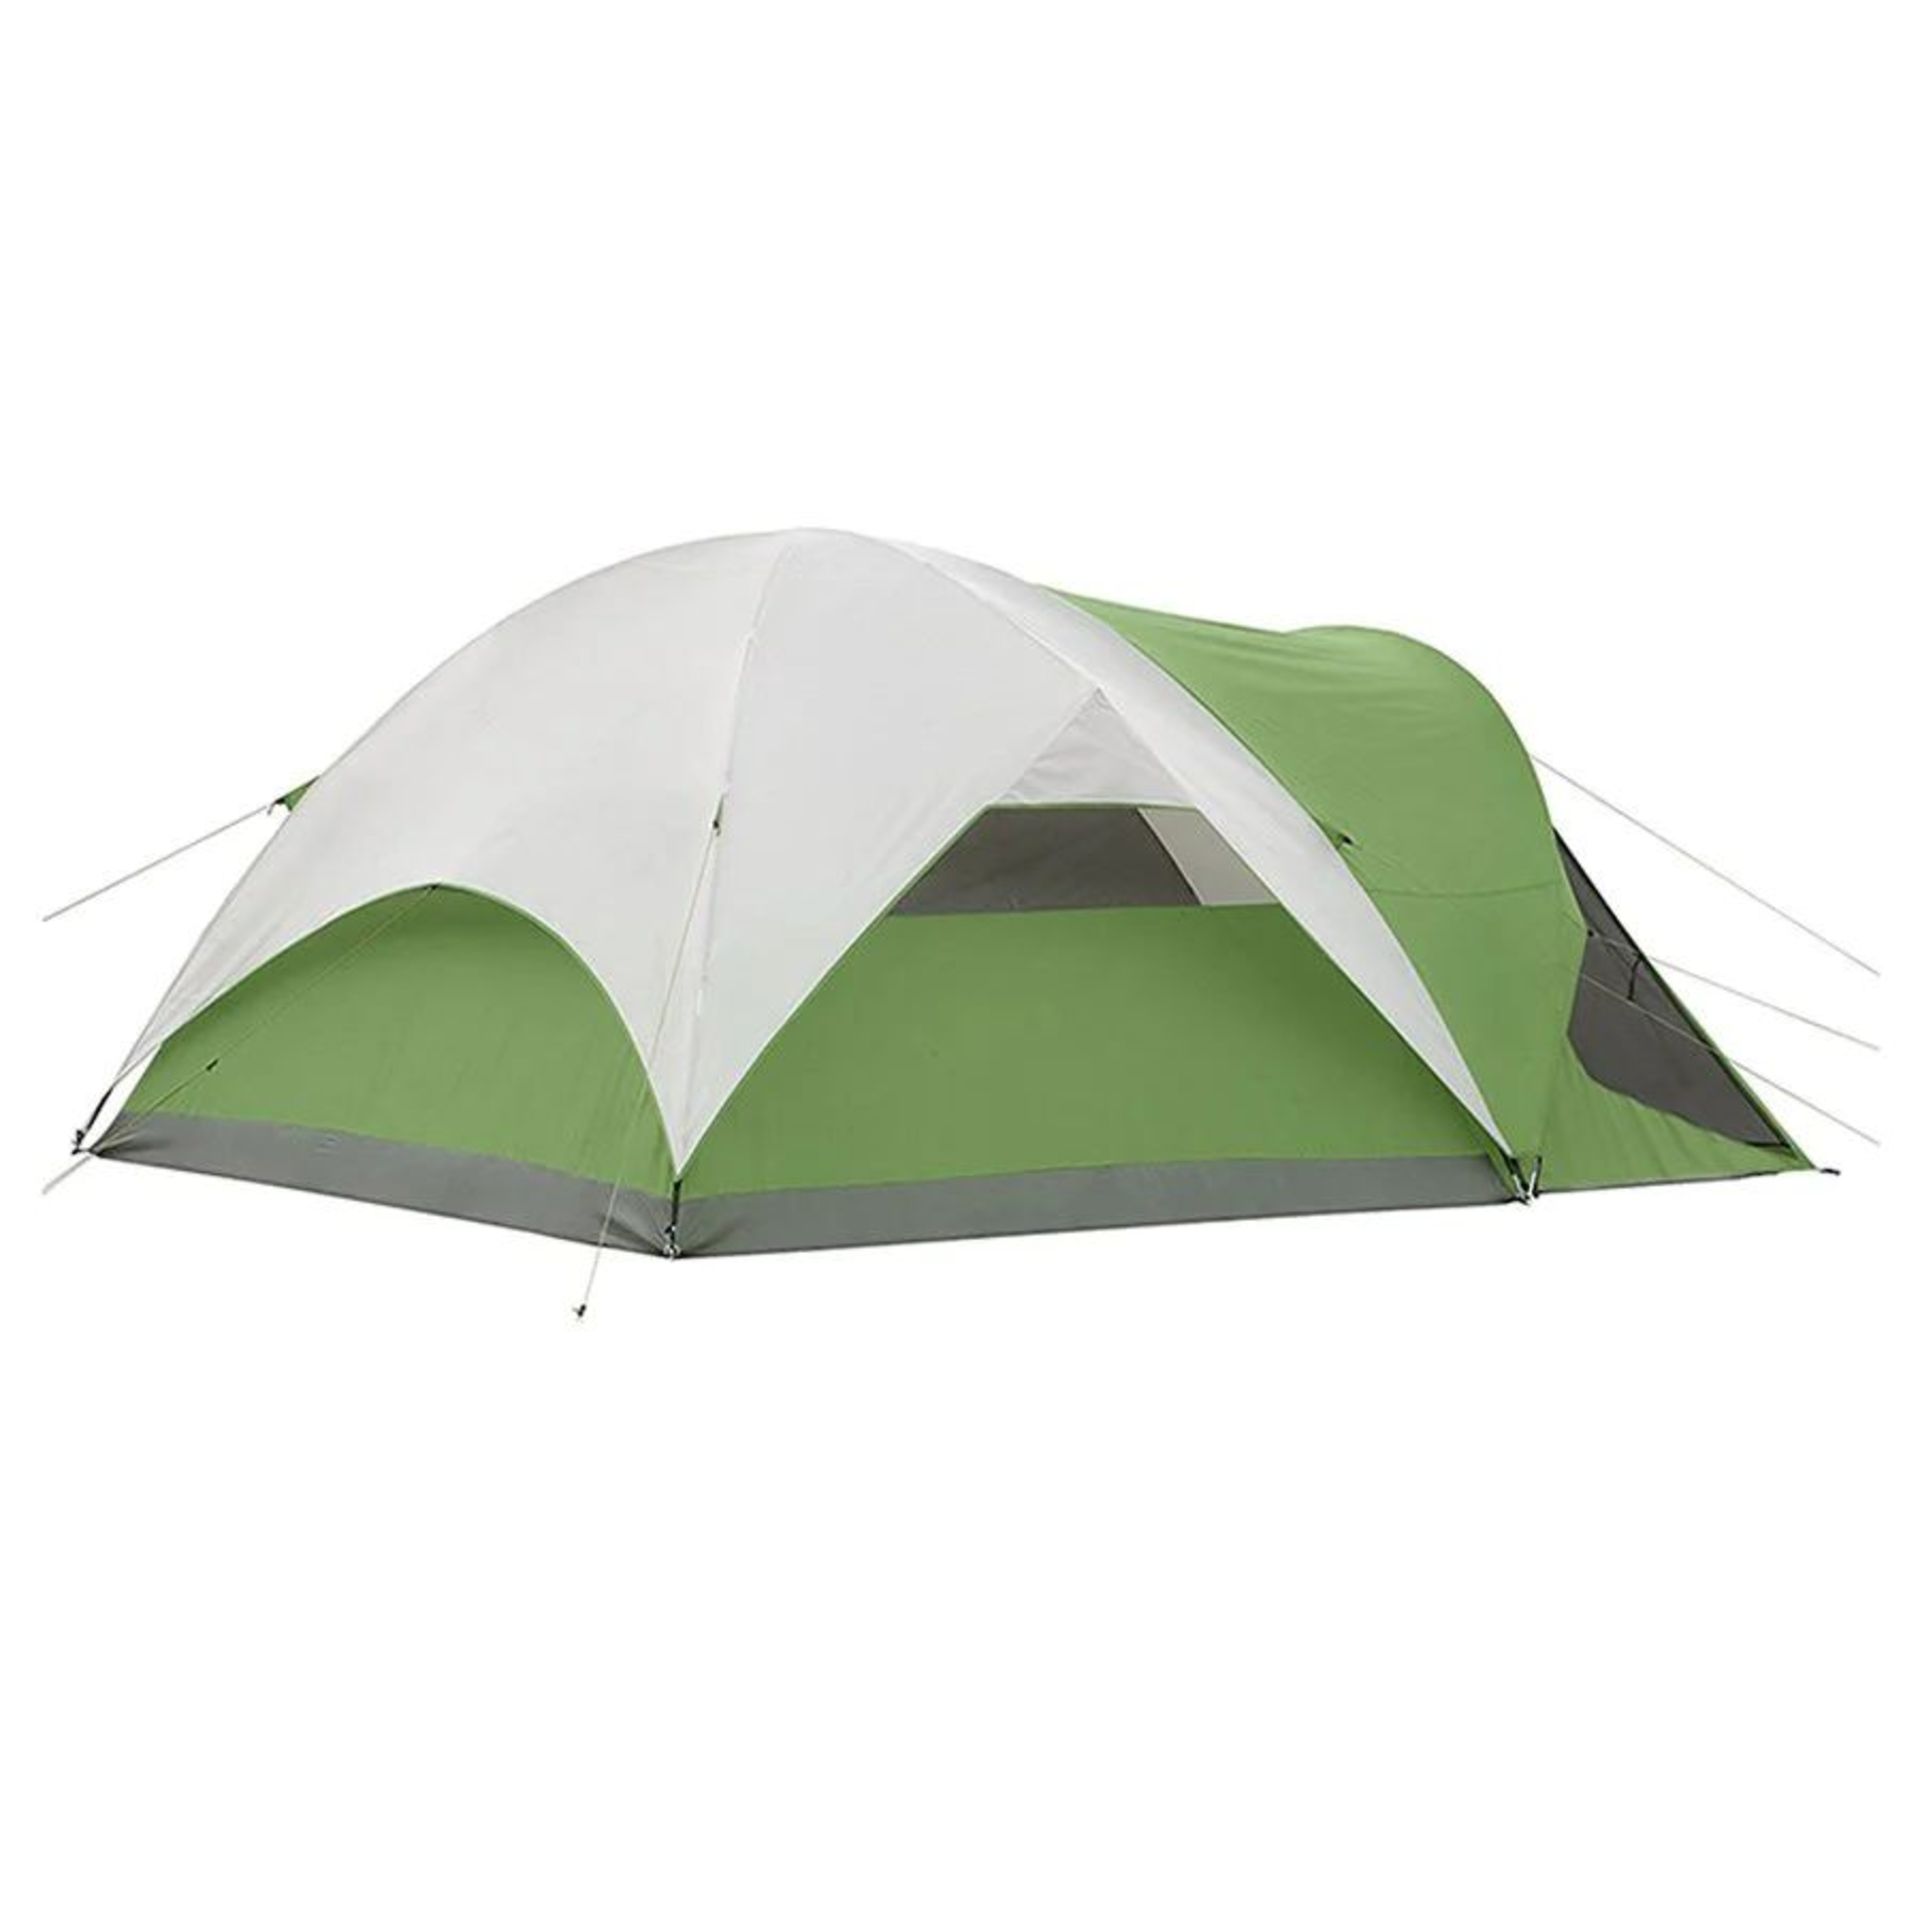 RBSM SPORTS 6-PERSON DOME CAMPING TENT W/ RAINFLY (NEW) (MSRP $300) - Bild 3 aus 4